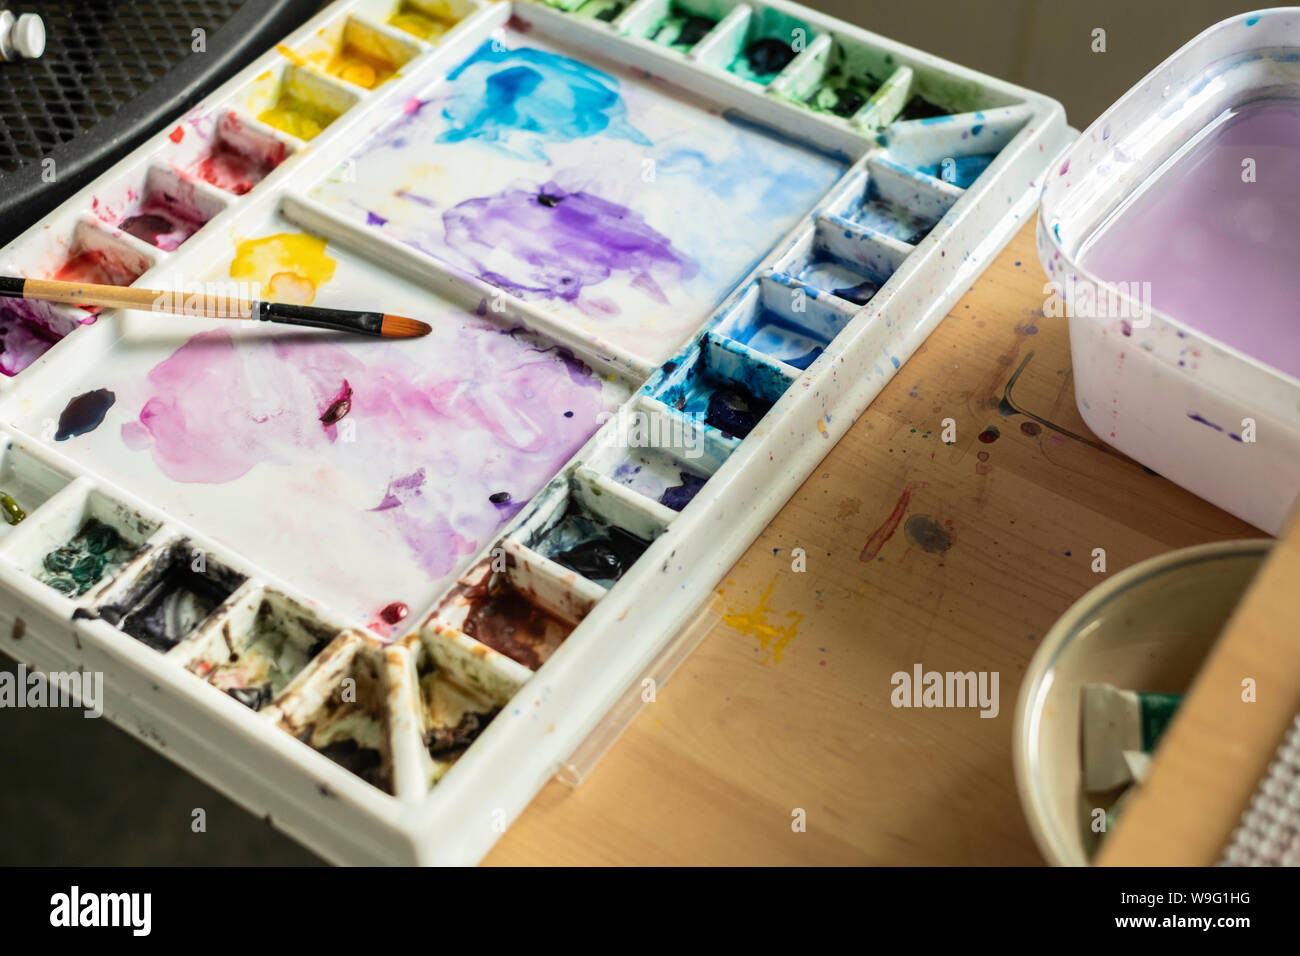 Artist palette with watercolor brush and watercolor paints in individual paint wells. Stock Photo